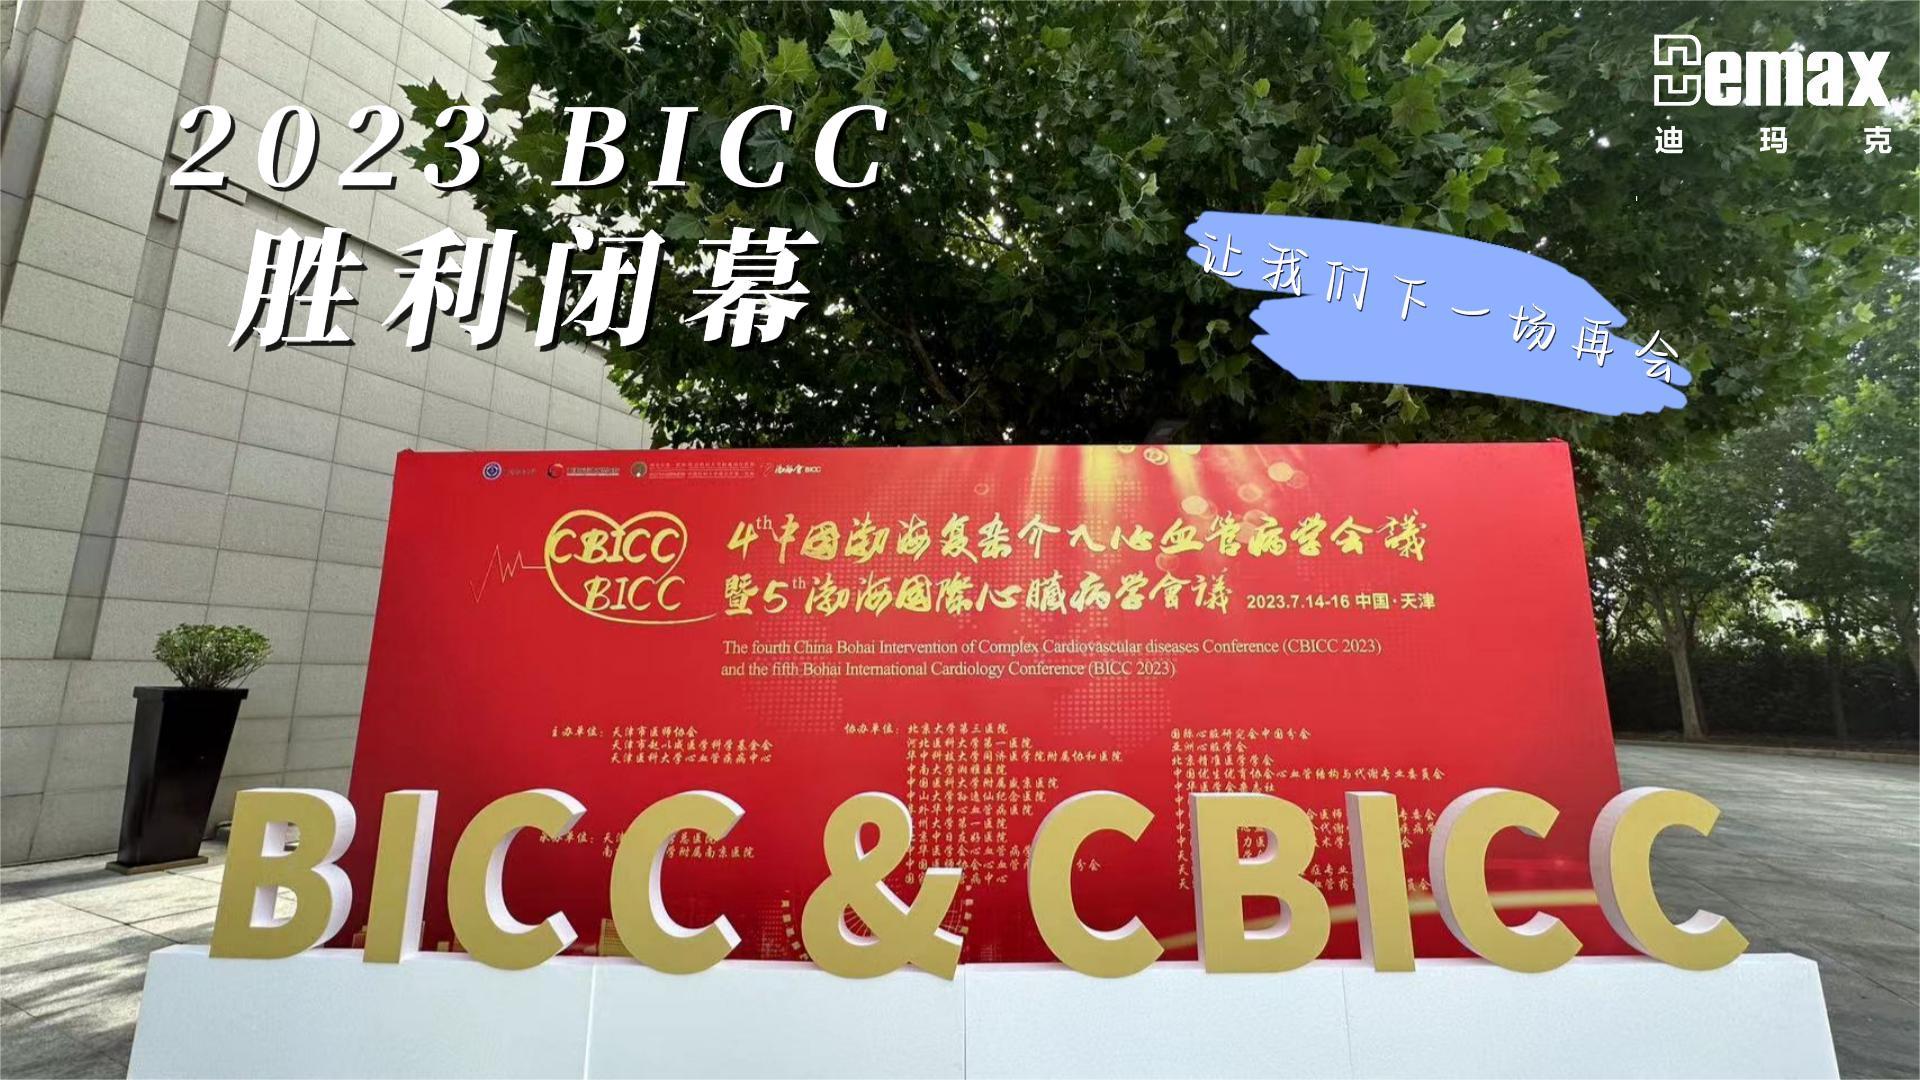 Demax's 2023 BICC Tianjin journey ended successfully